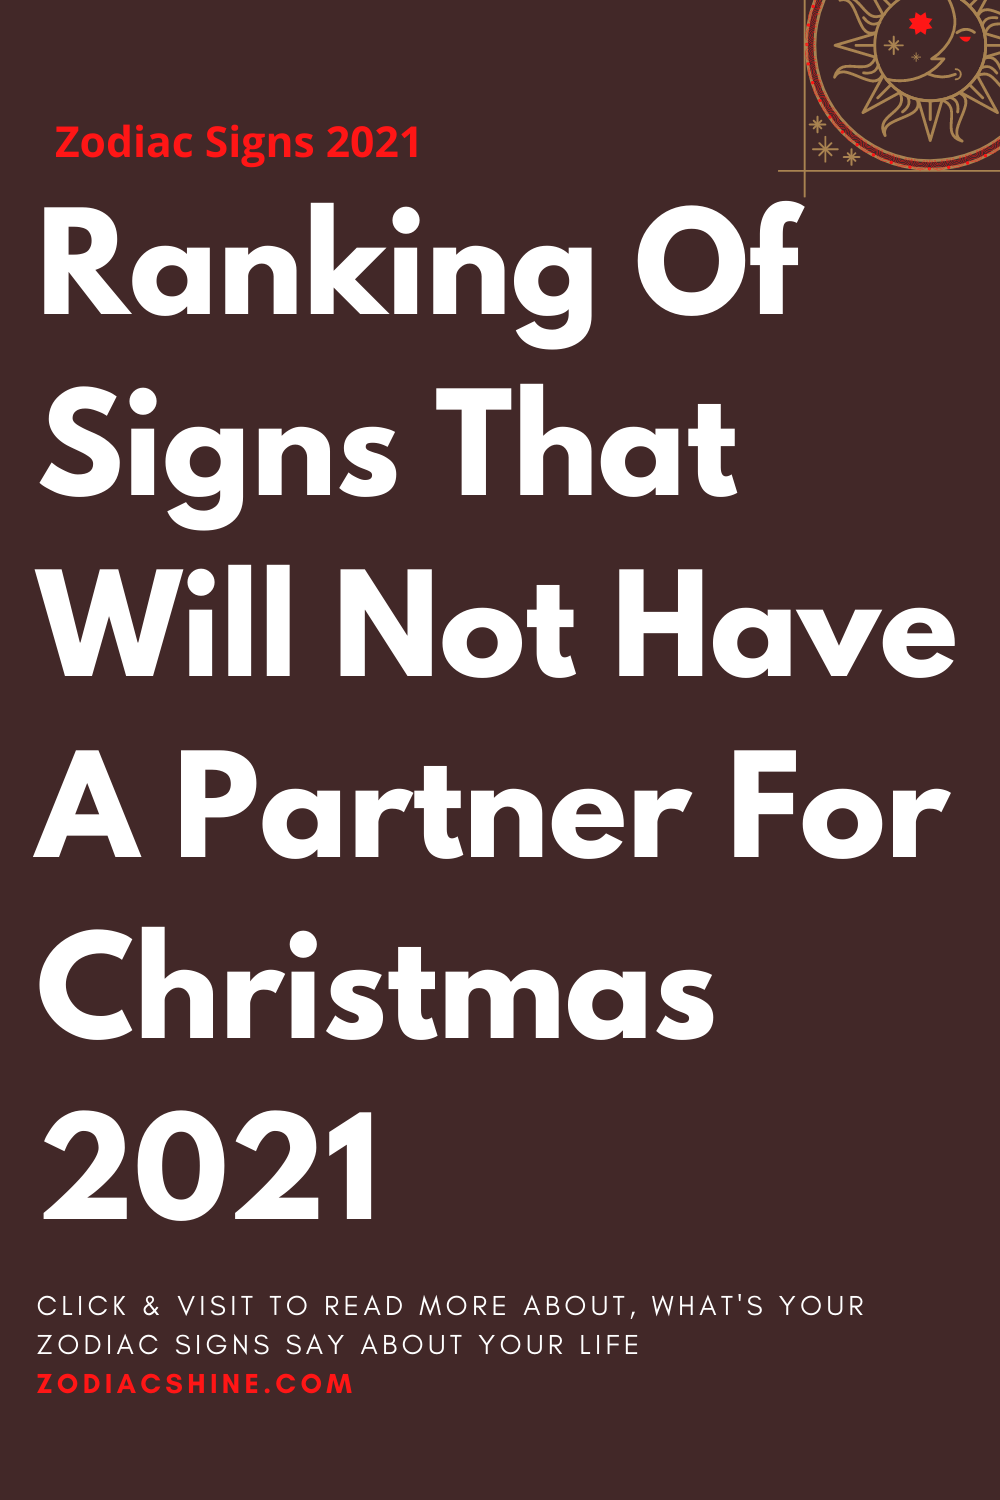 Ranking Of Signs That Will Not Have A Partner For Christmas 2021